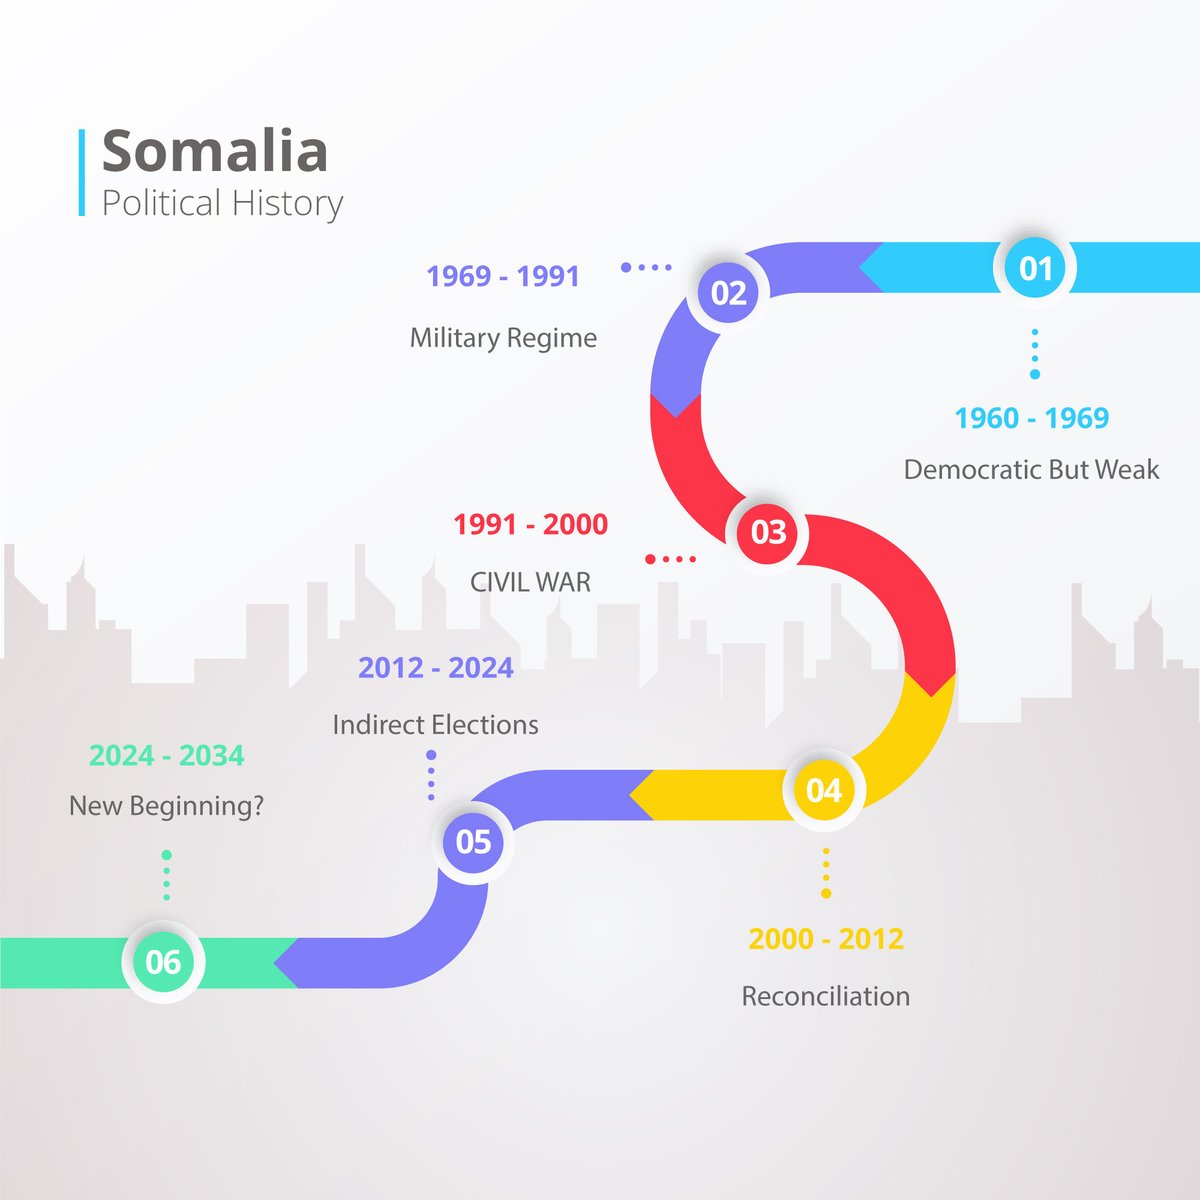 The rise and fall of Somalia in one infographic: 64 years old with ups and downs. From democracy to dictatorship, civil war to reconciliation, Somalia's political story since independence. Are we entering a new era? Only time will tell! Yesterday, today, and tomorrow.